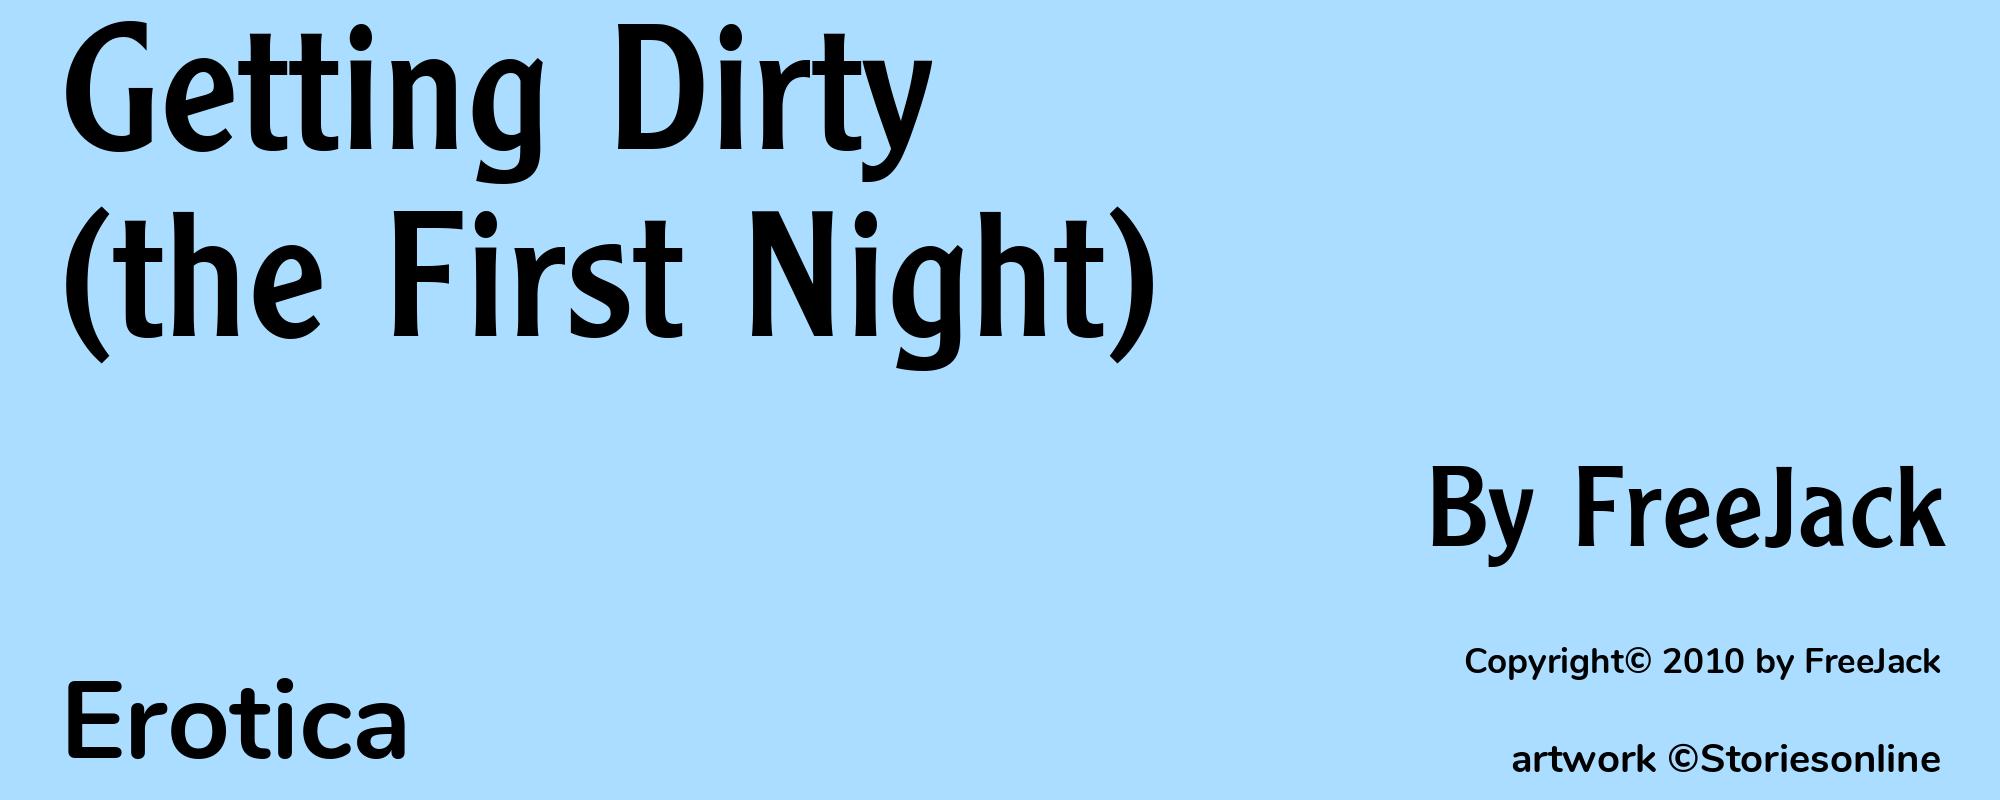 Getting Dirty (the First Night) - Cover